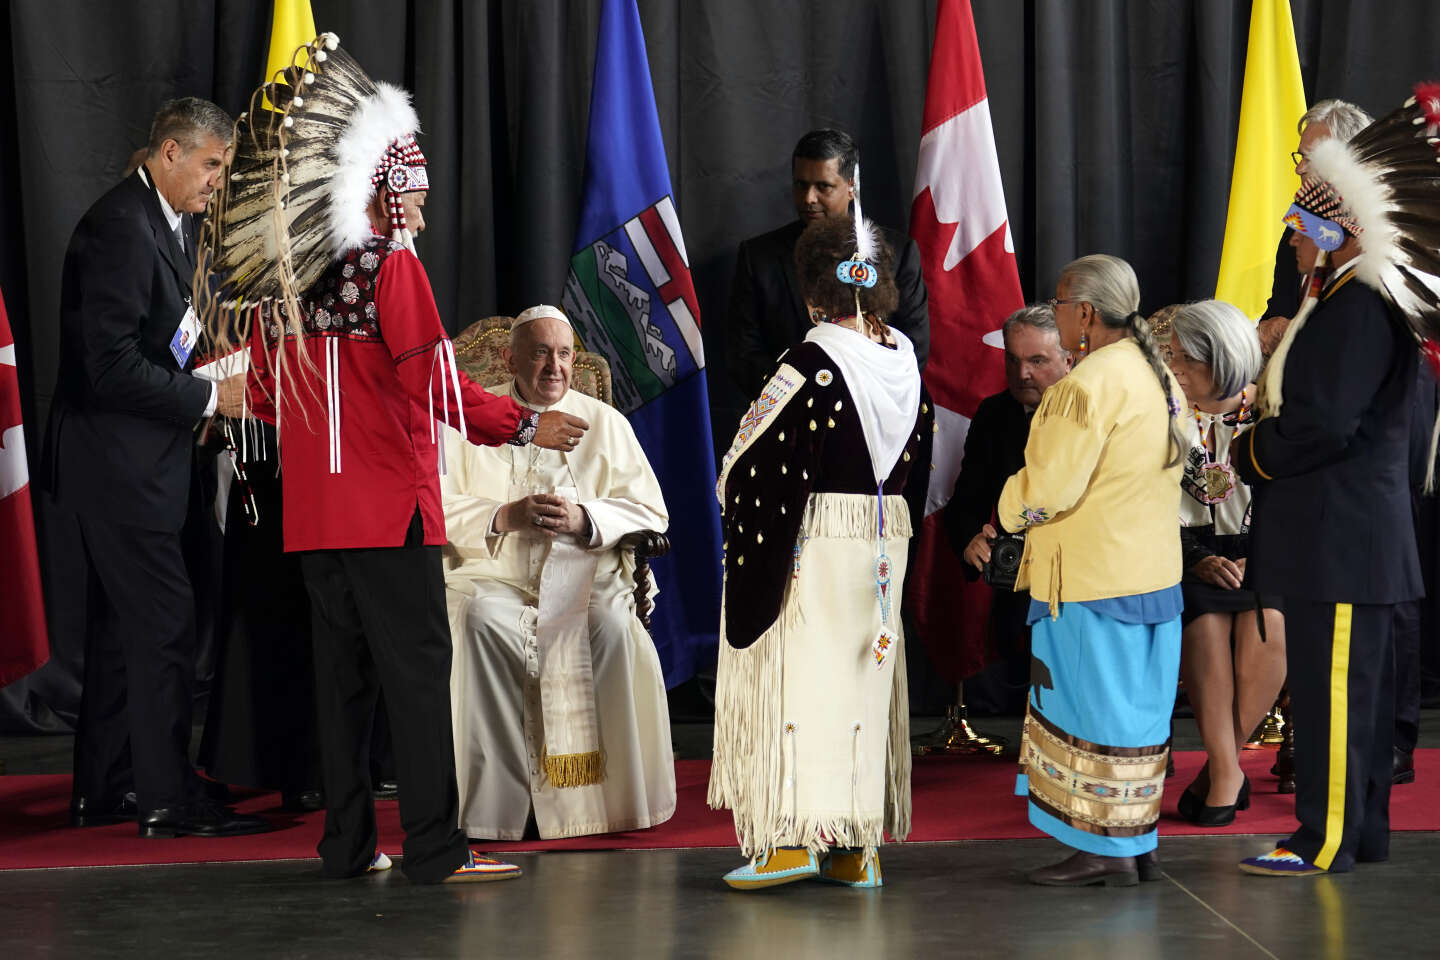 Pope Francis asks for “pardon” for Catholic involvement in “devastating” indigenous policies in Canada